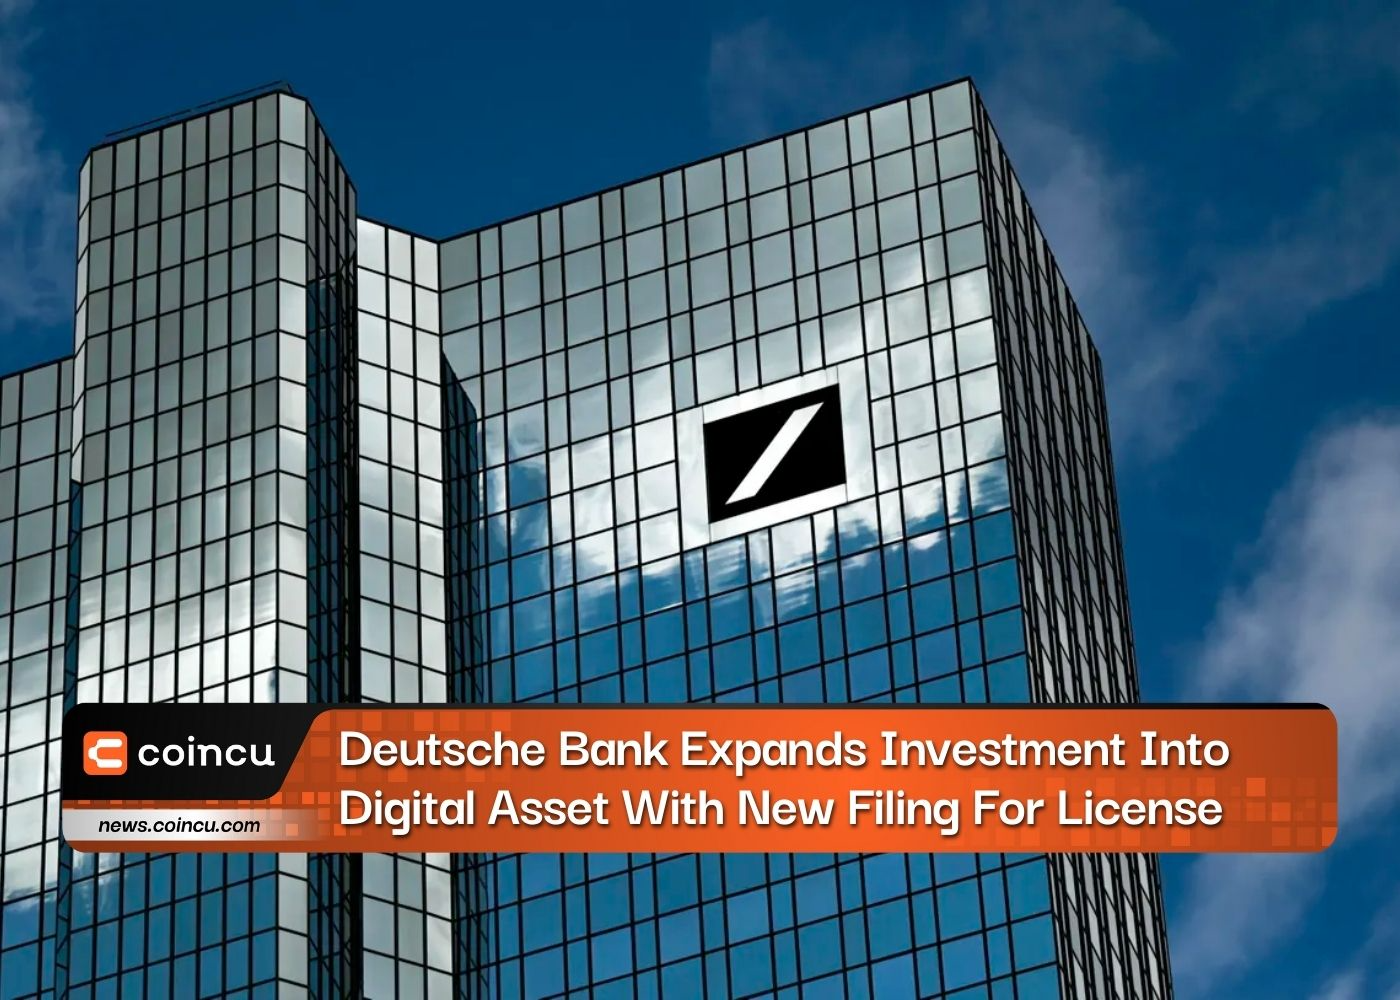 Deutsche Bank Expands Investment Into Digital Asset With New Filing For License